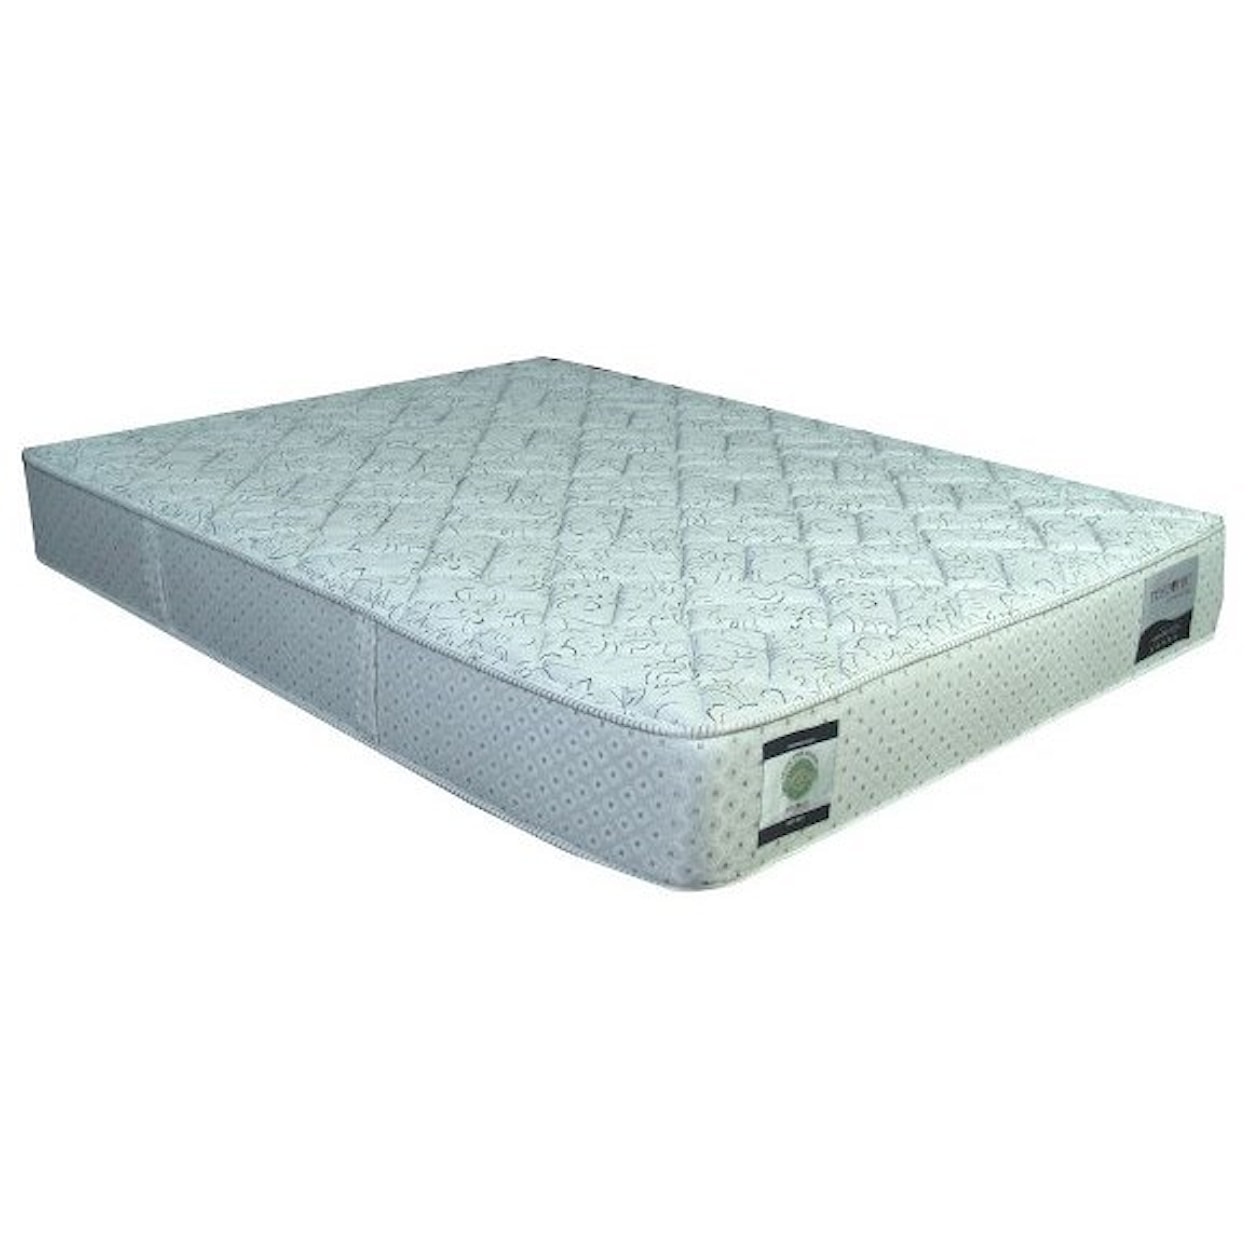 Restonic CC Linwood Firm King 12" Firm Two Sided Mattress